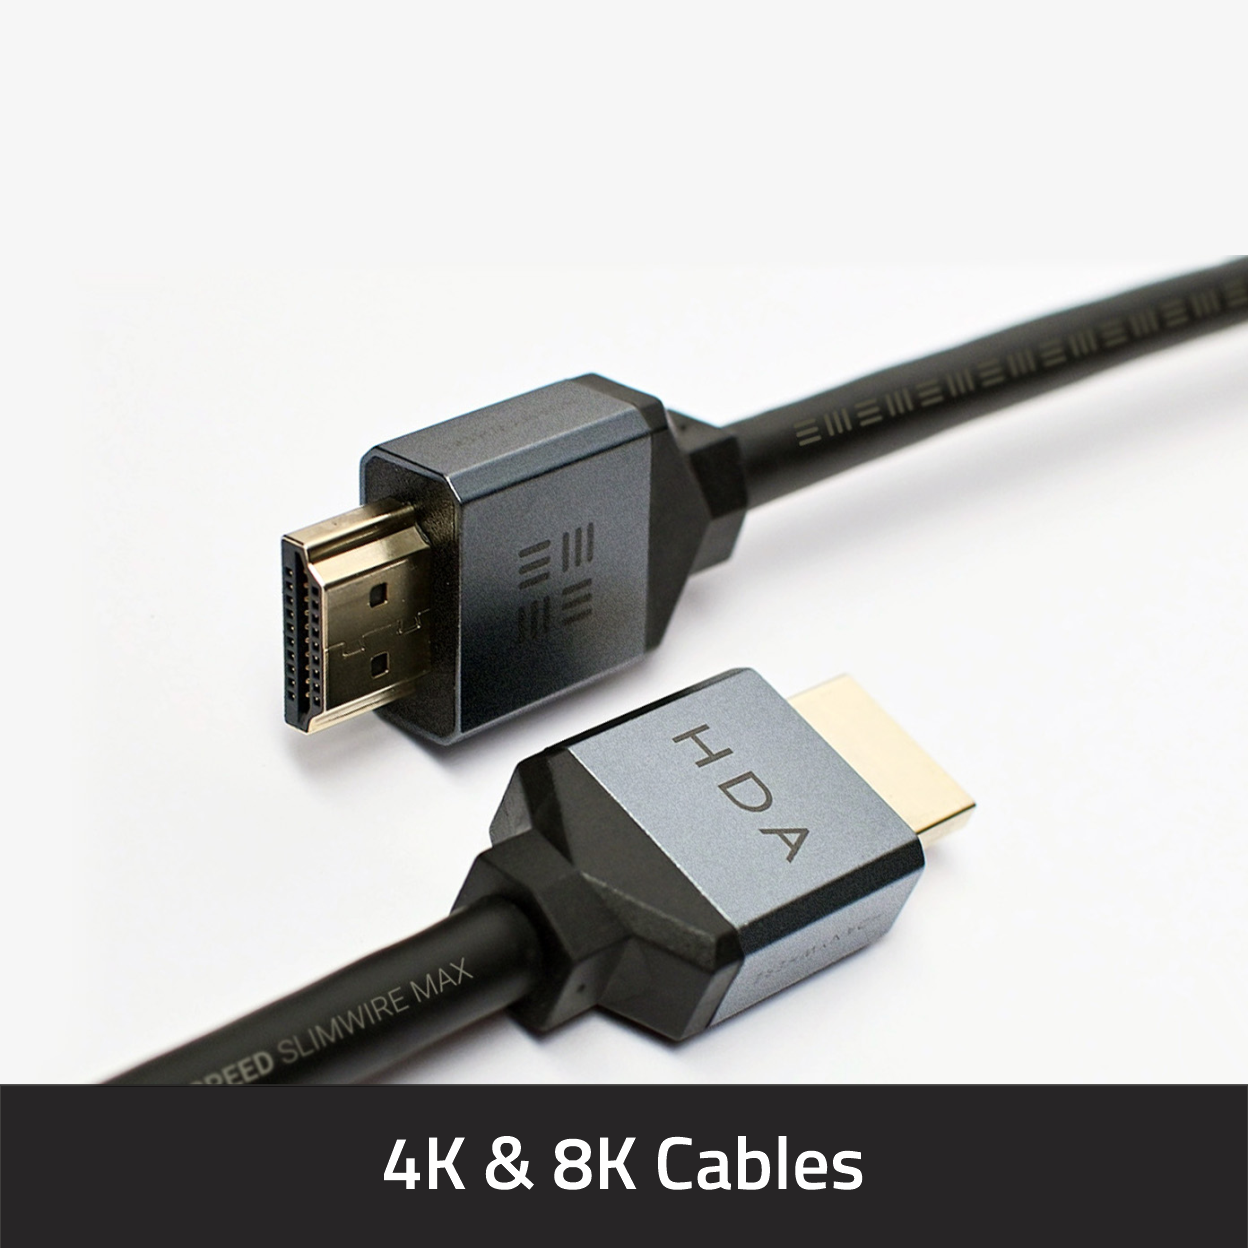 4K & 8K Cables